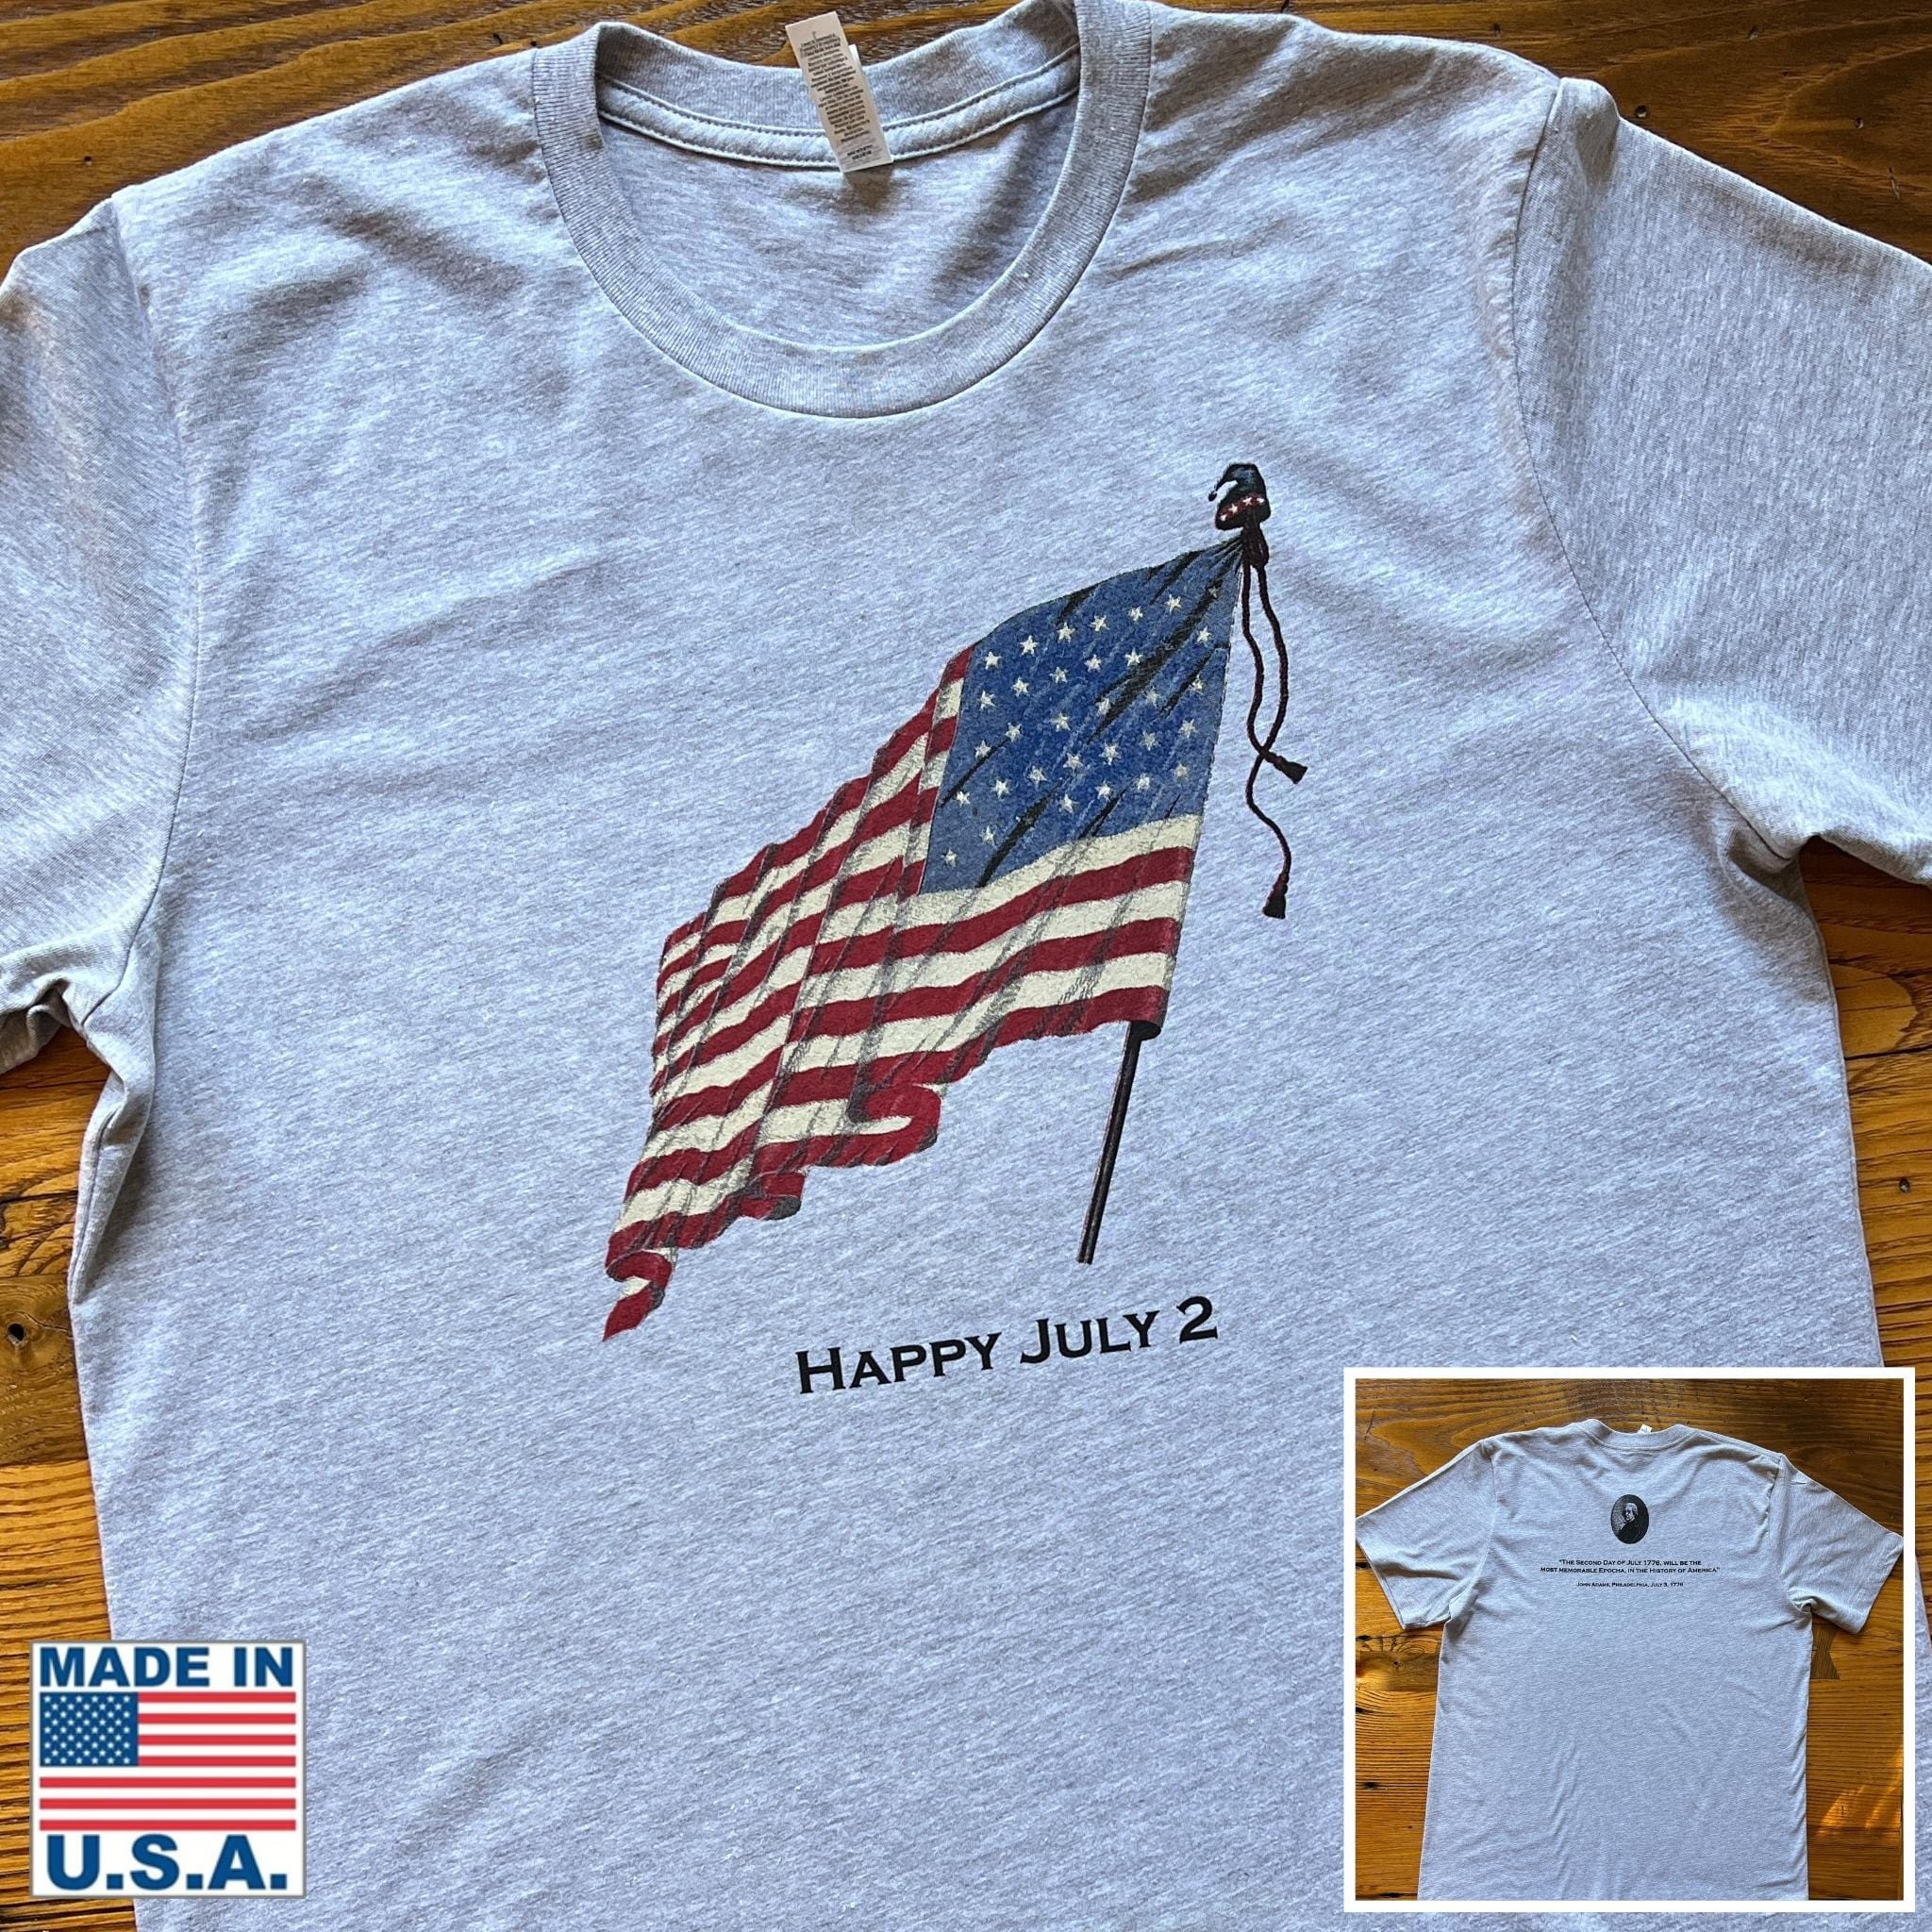 Happy July 2” T-shirt with John Adams and his quote on the back The History List